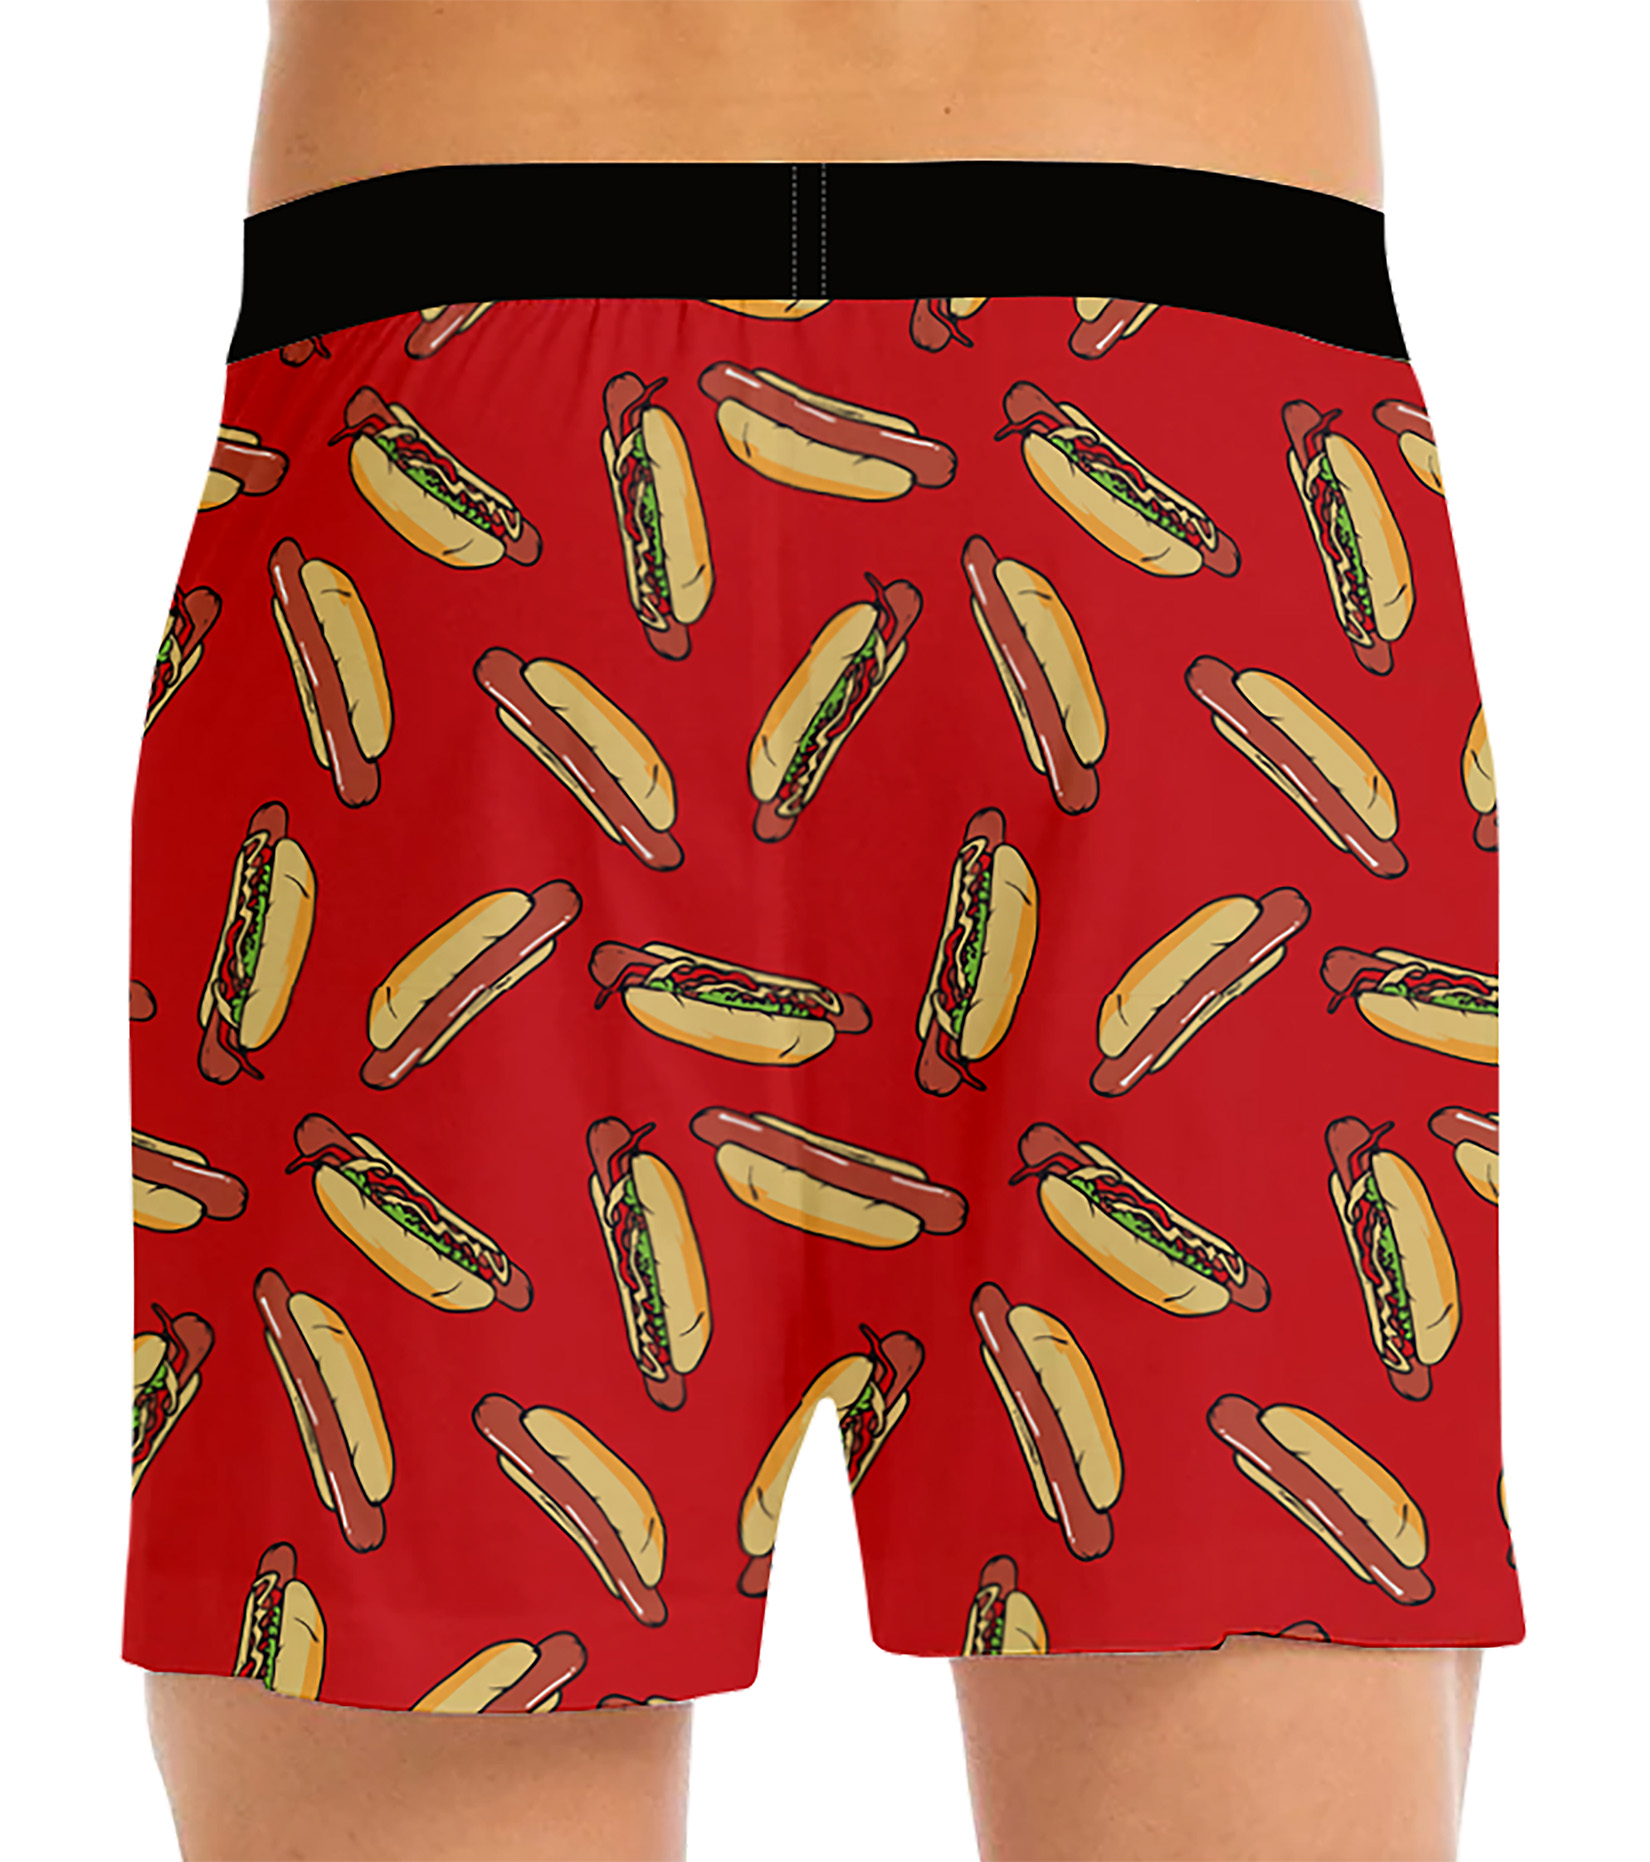 Hot Stuff boxer shorts, Collection 2023